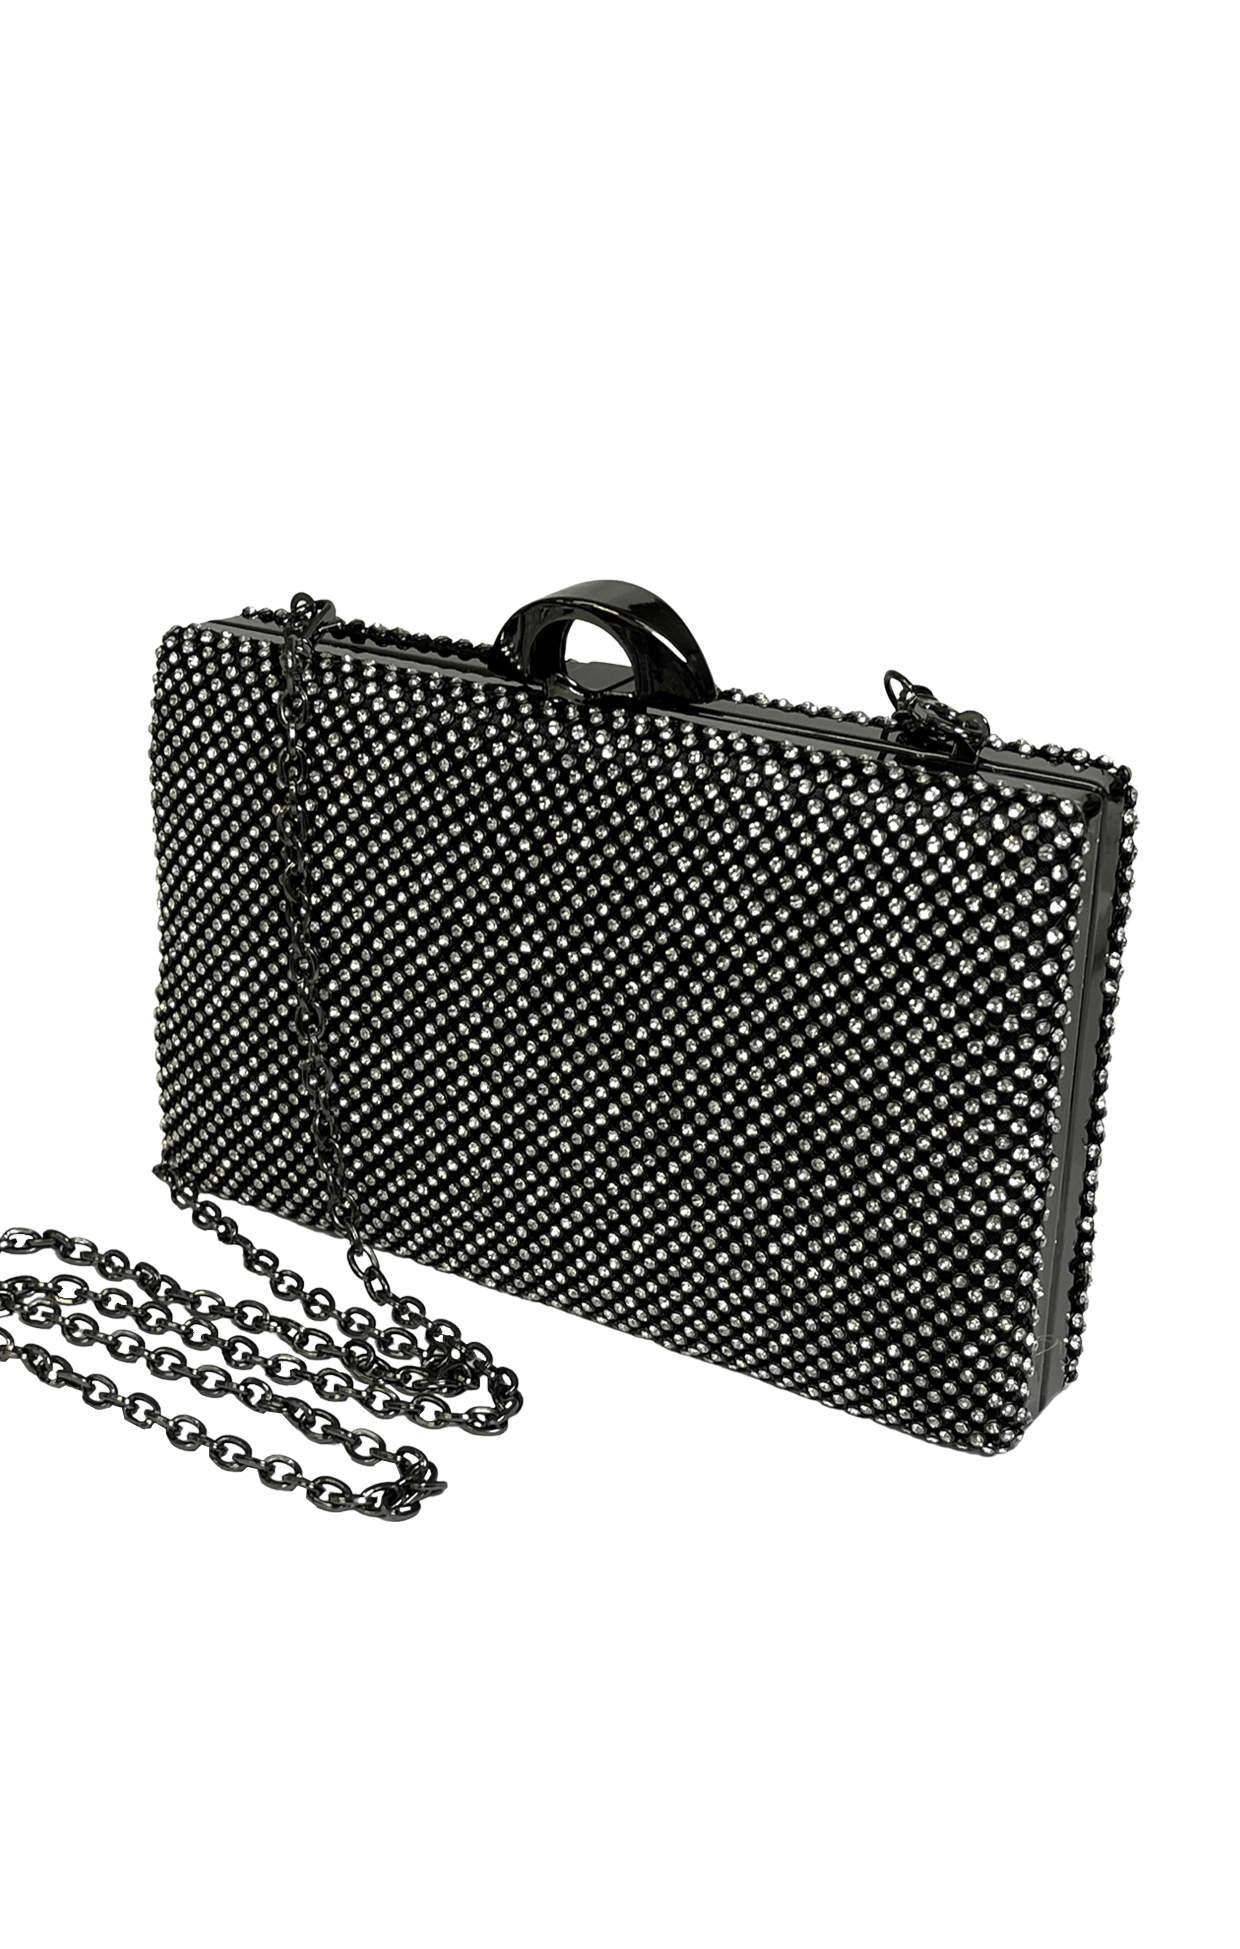 ACCESSORIES Bags Clutches One Size / Black MARIAH DIAMANTE STRUCTURED CLUTCH IN BLACK